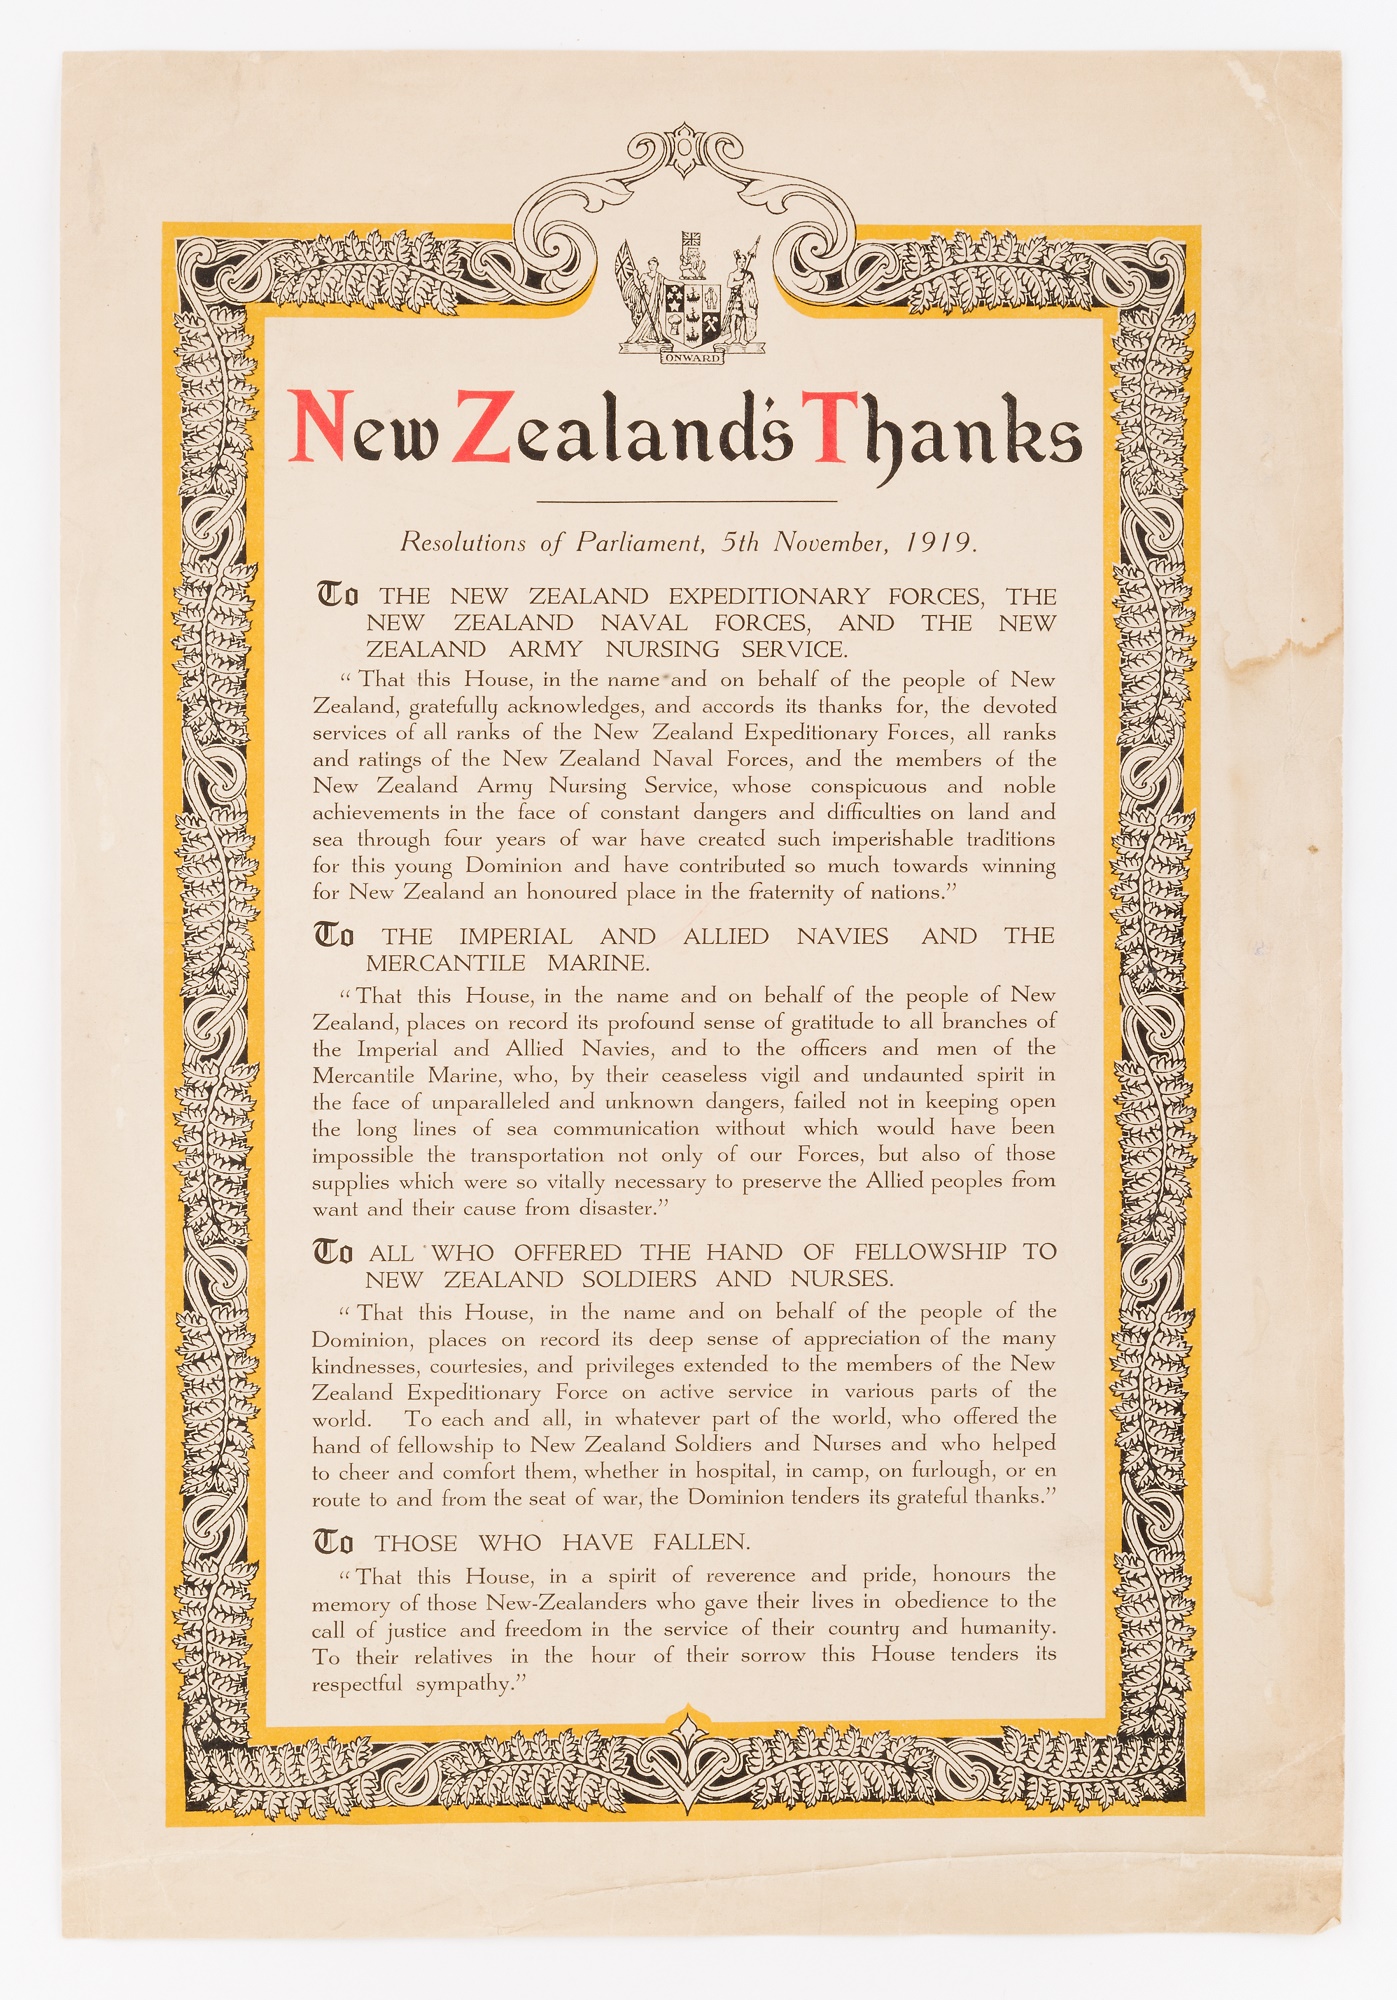 ‘New Zealand Thanks’ Address. This document was produced in 1919 by New Zealand’s Parliament. It thanks all service personnel and those who helped them in 1914-18 war.